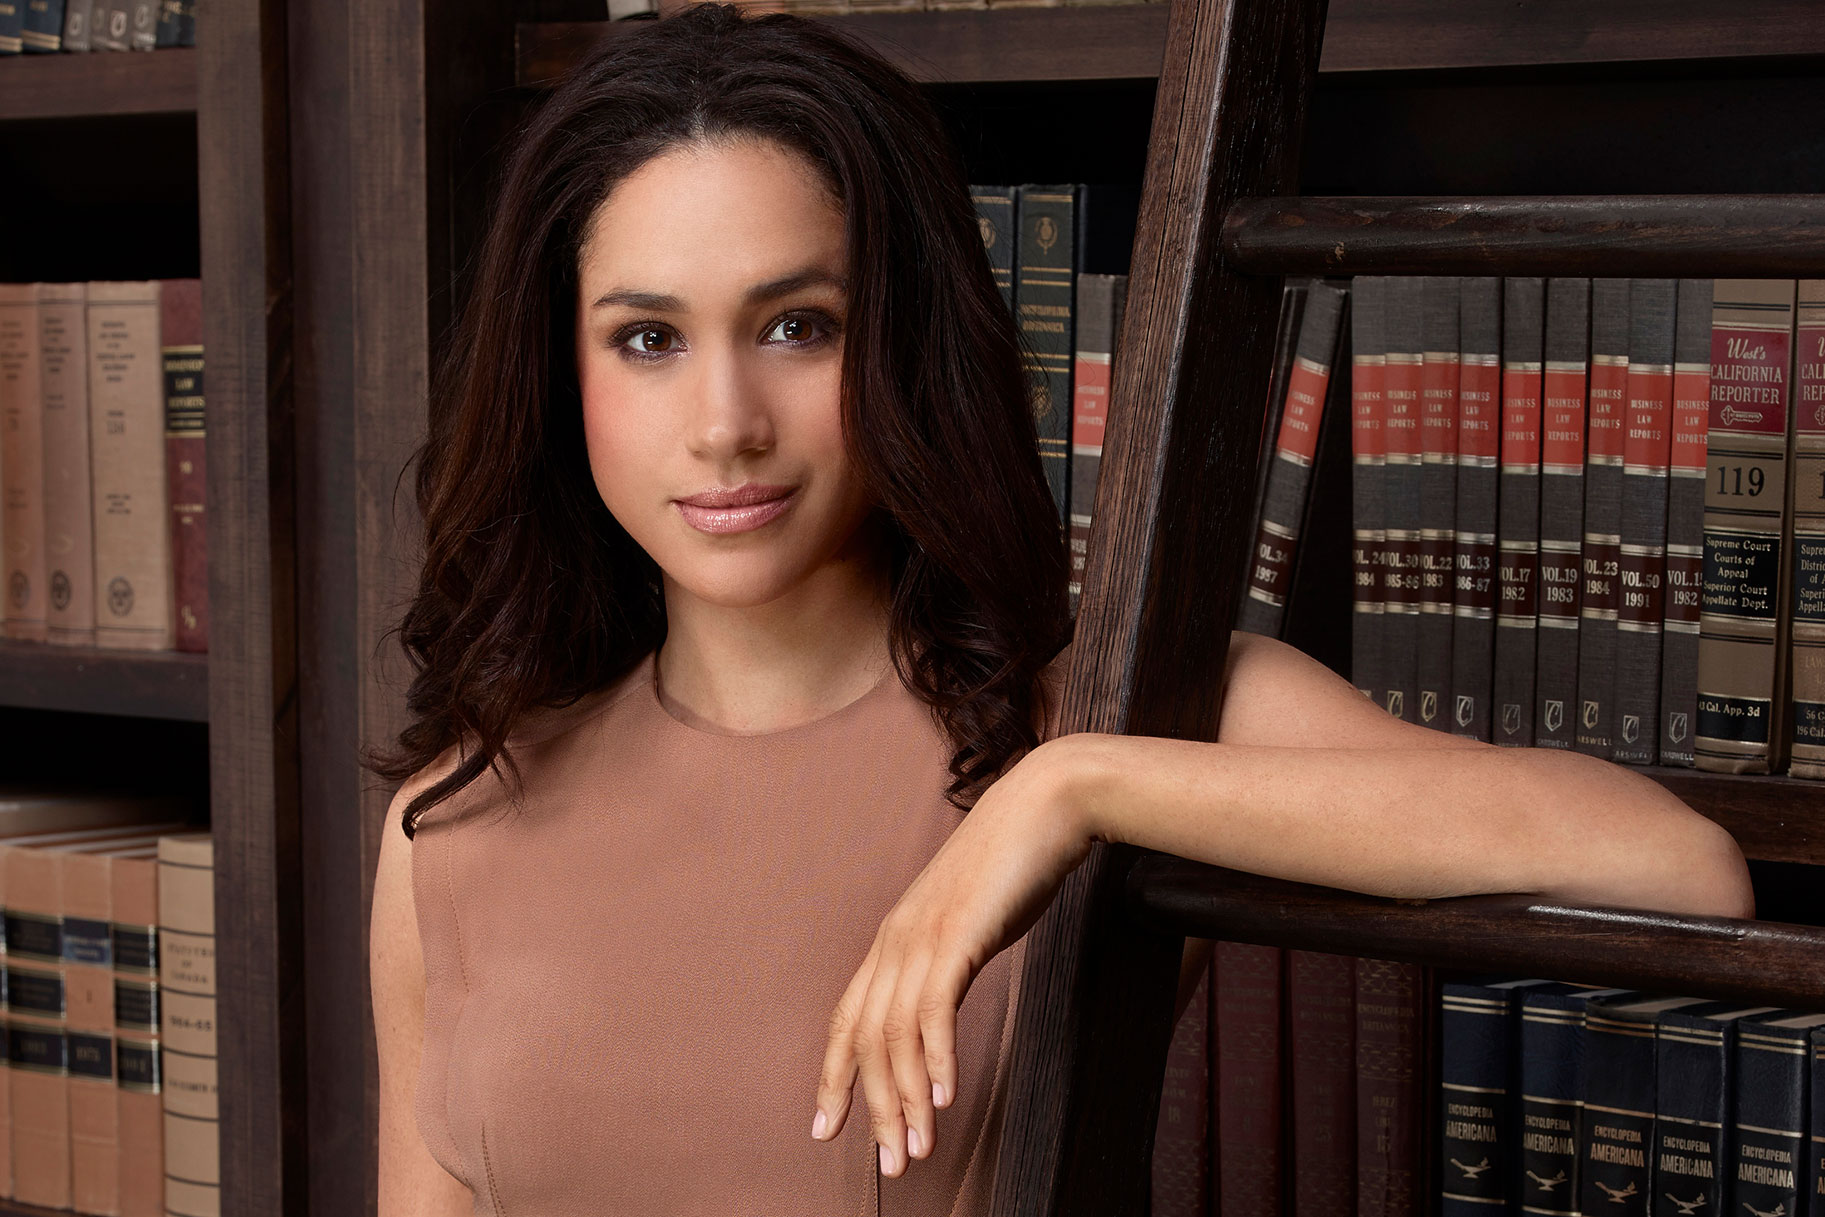 Meghan Markle posed in a library